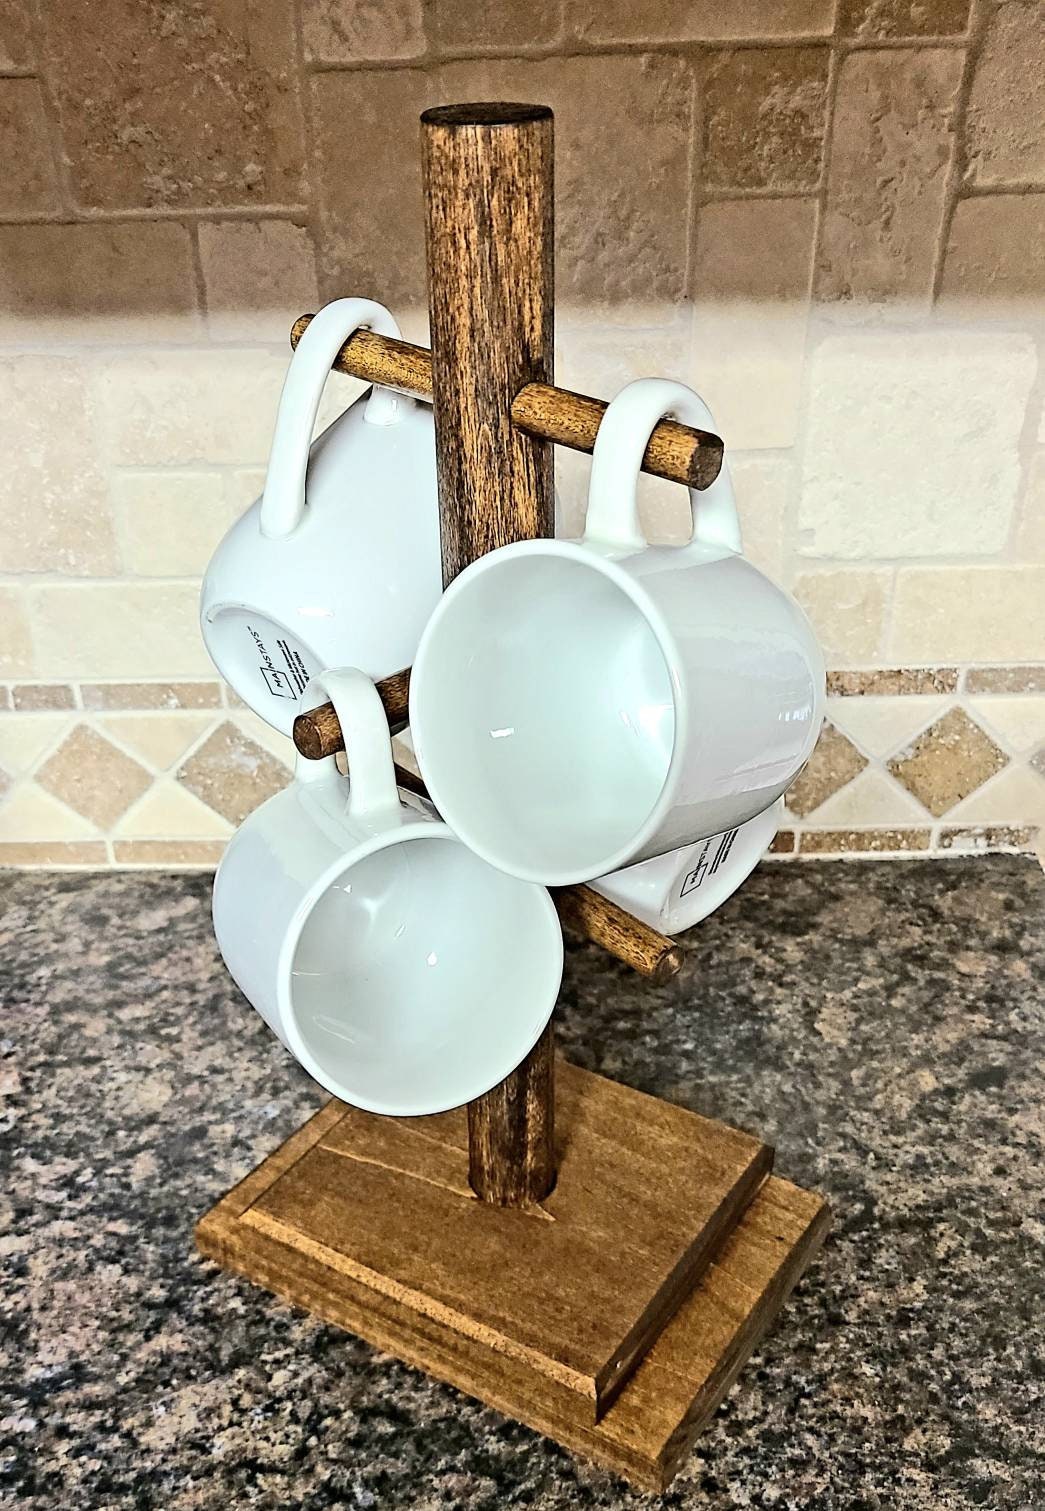 GWEOBZ 2 Pack Mug Holders for Counter 6 Coffee Mugs Holder Metal 2 Tier  Farmhouse Cup Organizer for Kitchen Cabinets - Brown (2)